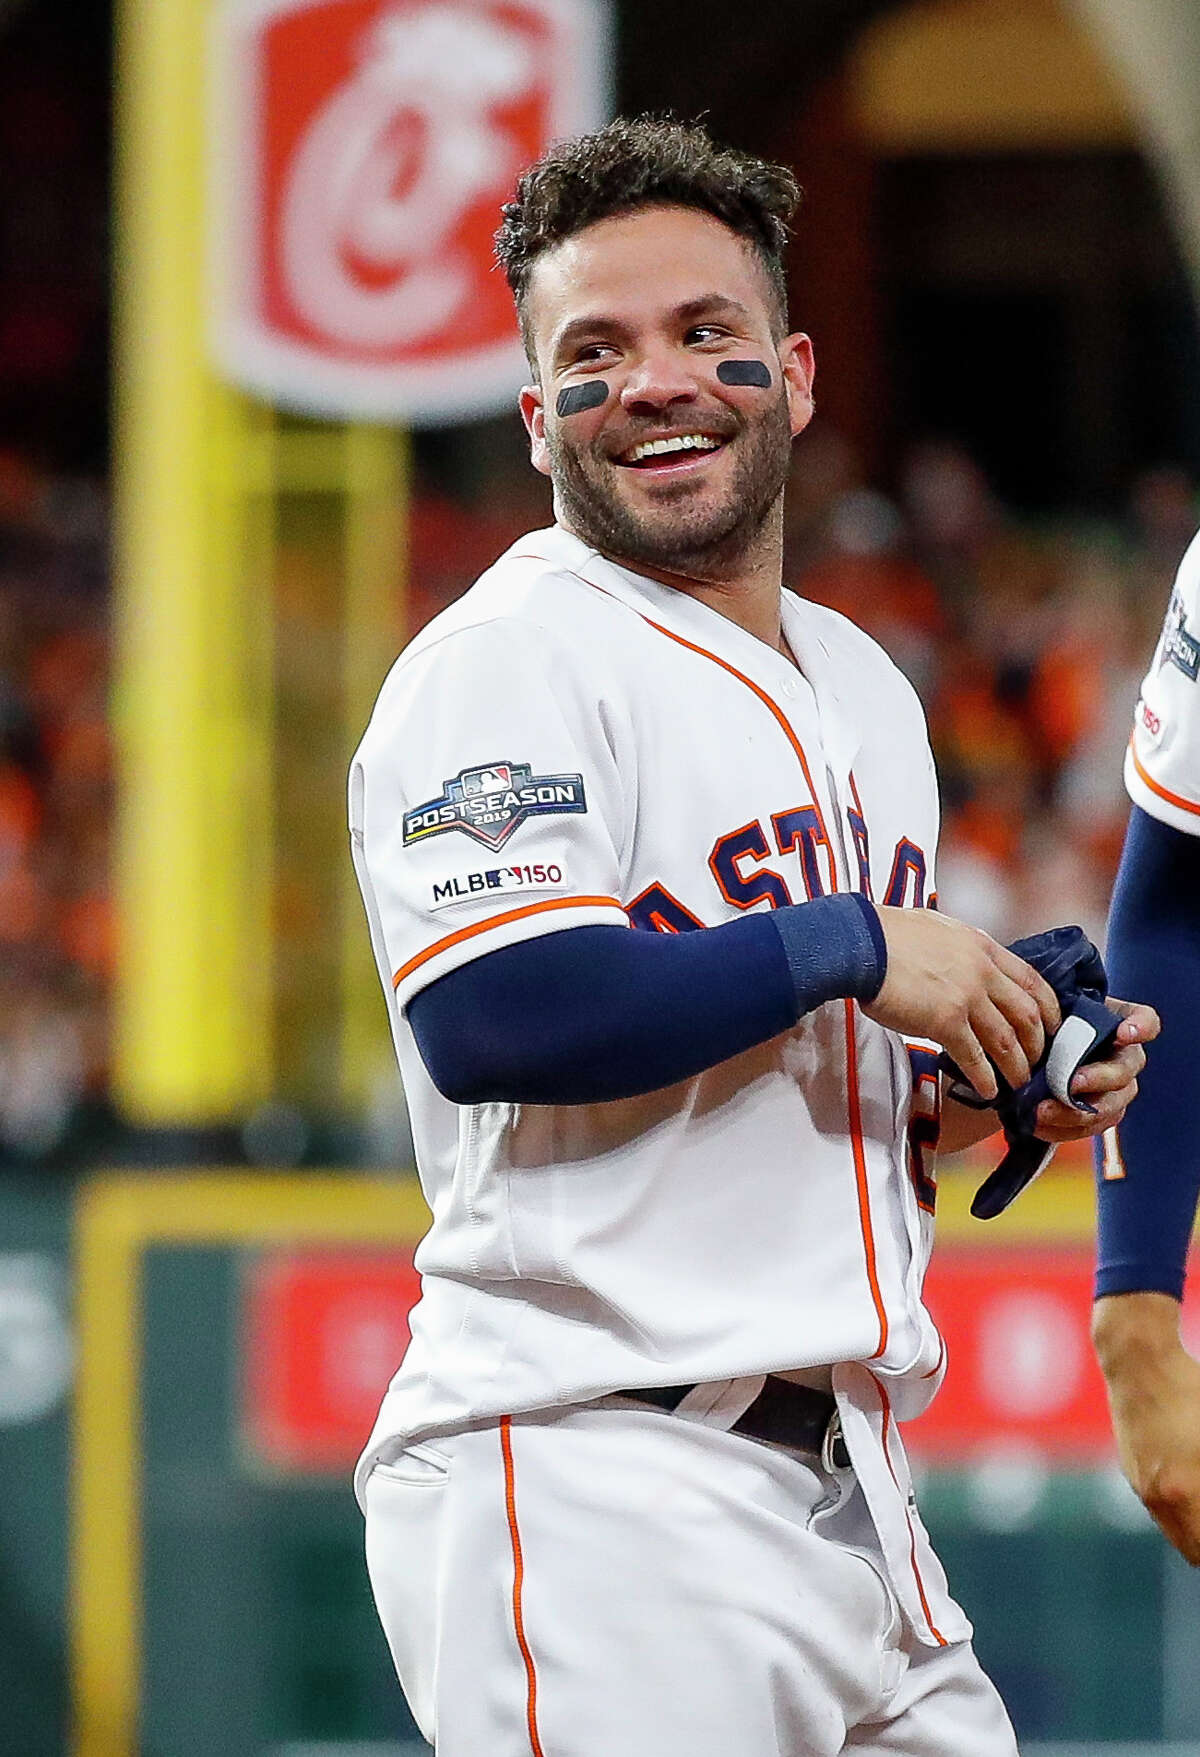 Lead the way. Be a role model': José Altuve wrote inspiring letter